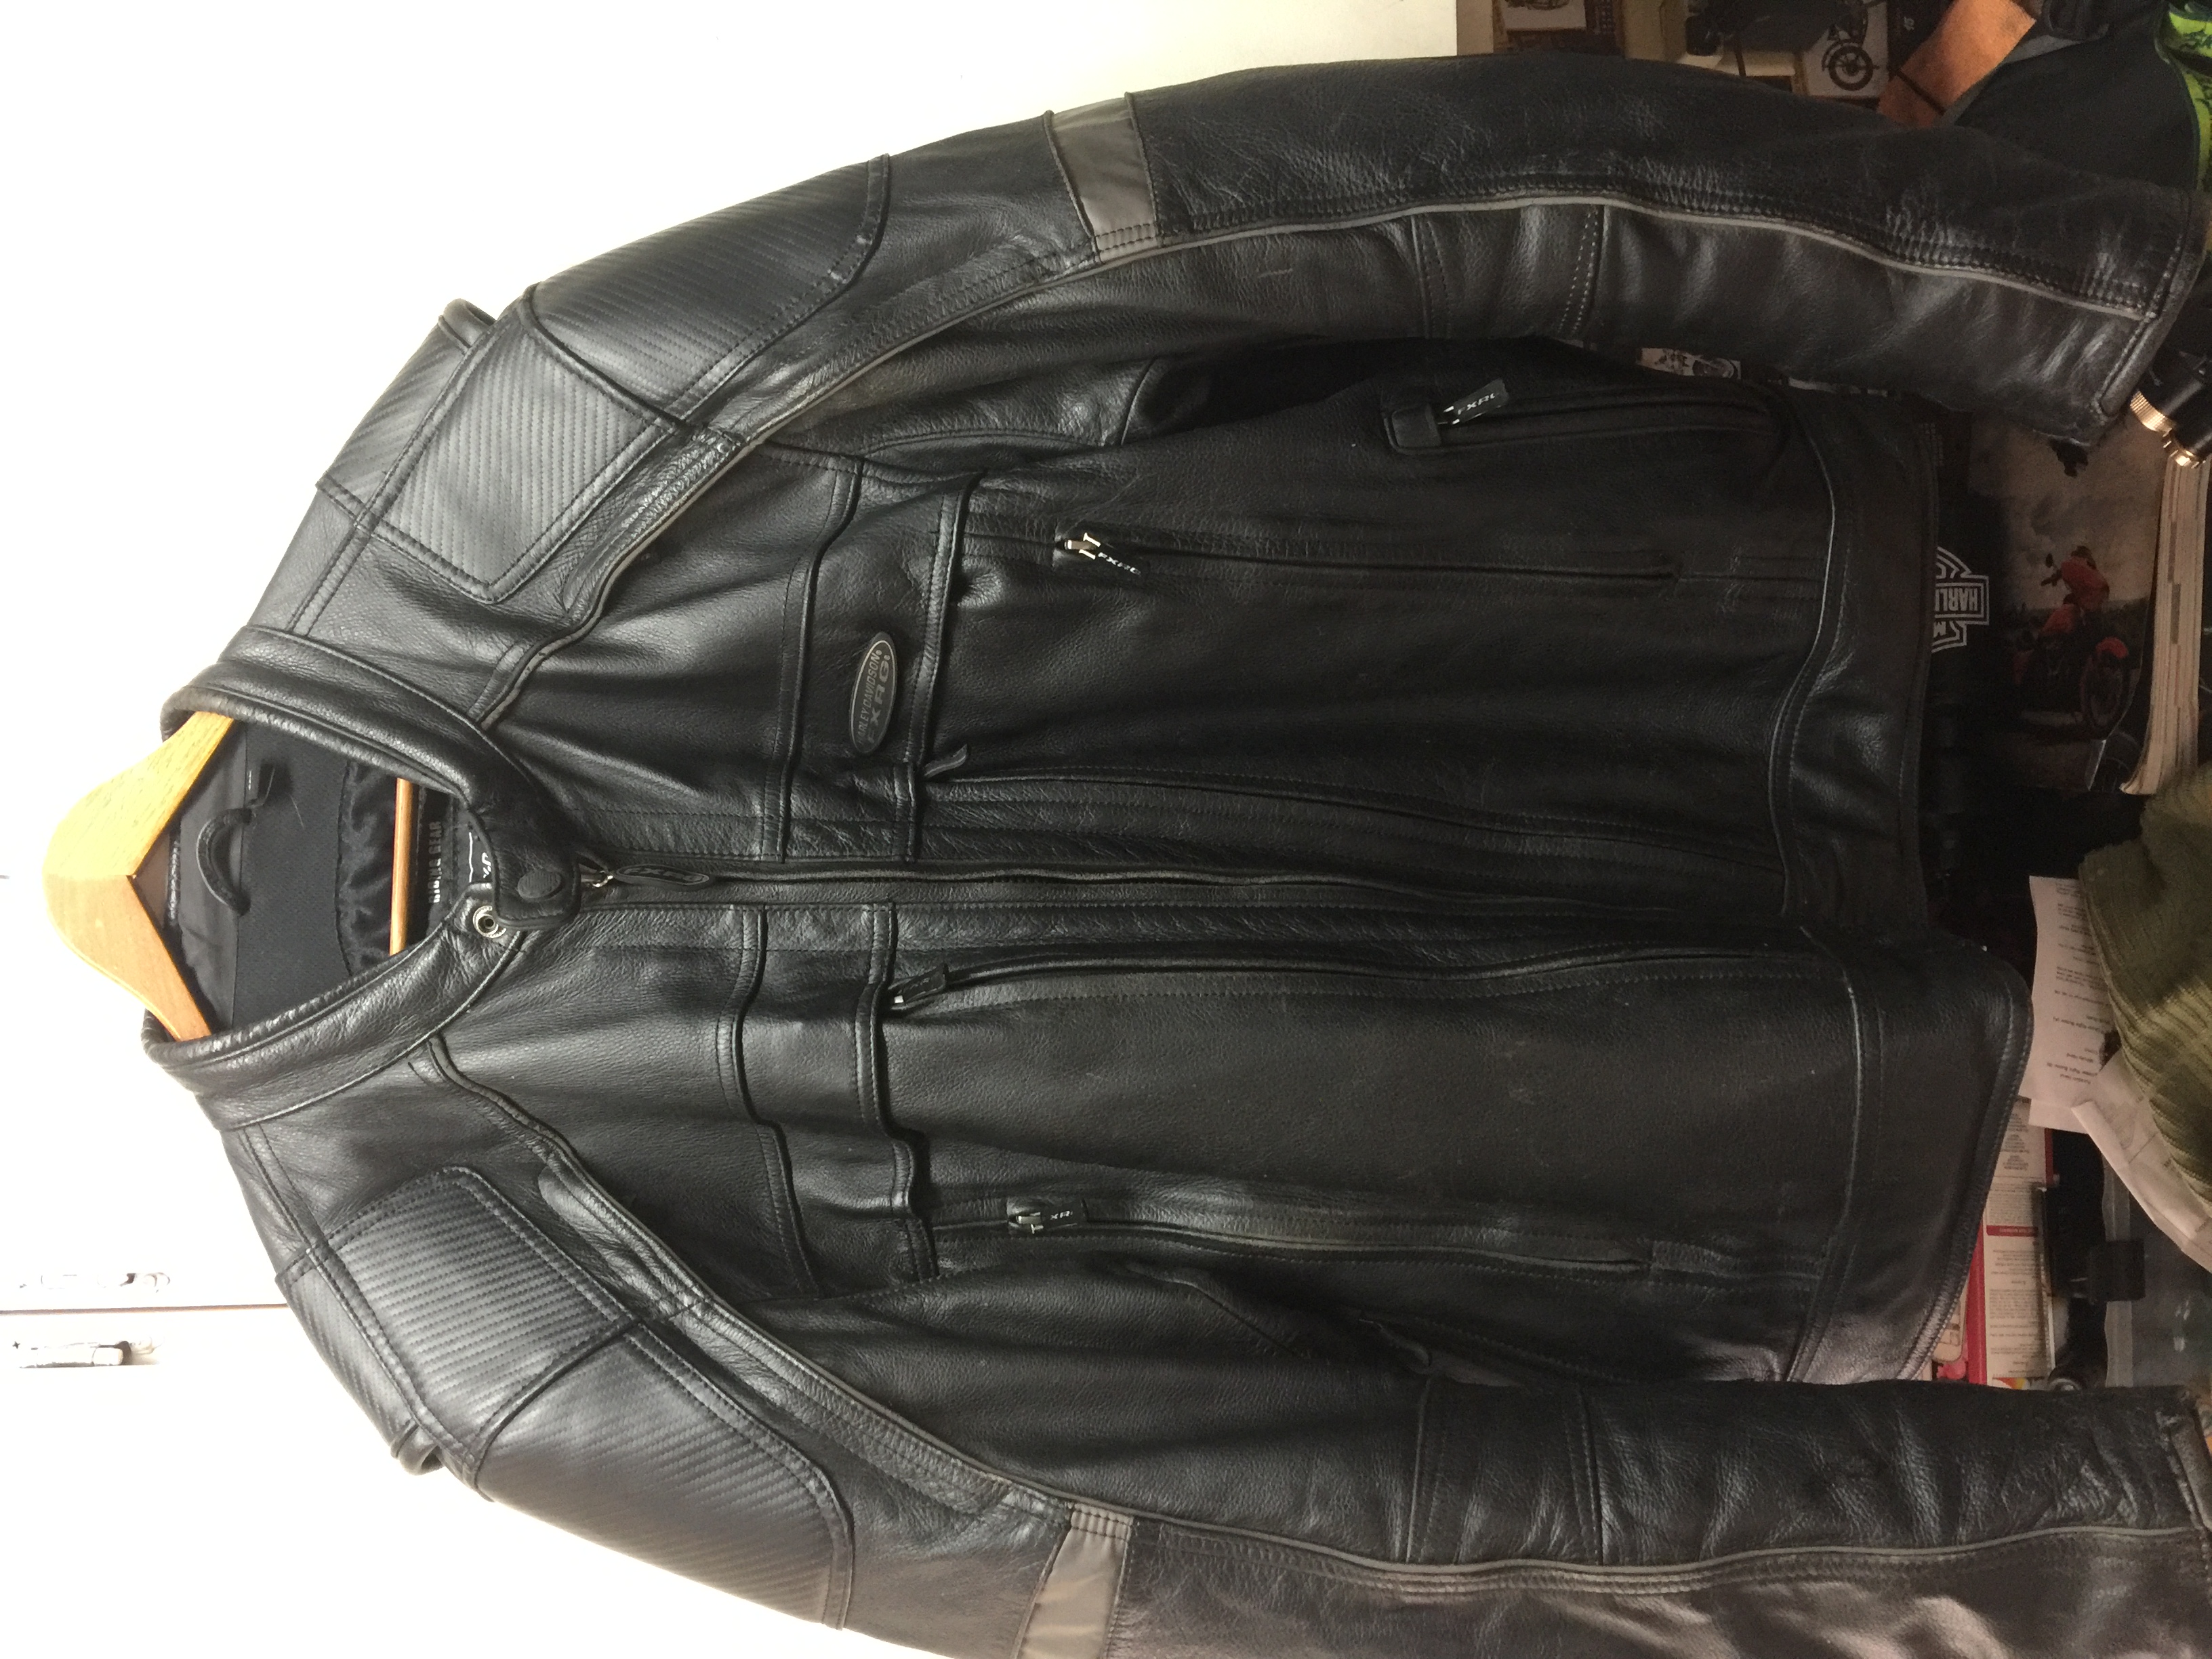 https://www.hdforums.com/forum/attachments/gear-and-other-items-for-sale/579932d1513531061-harley-davidson-fxrg-jacket-98040-12vm-xxl-img_4978.jpg